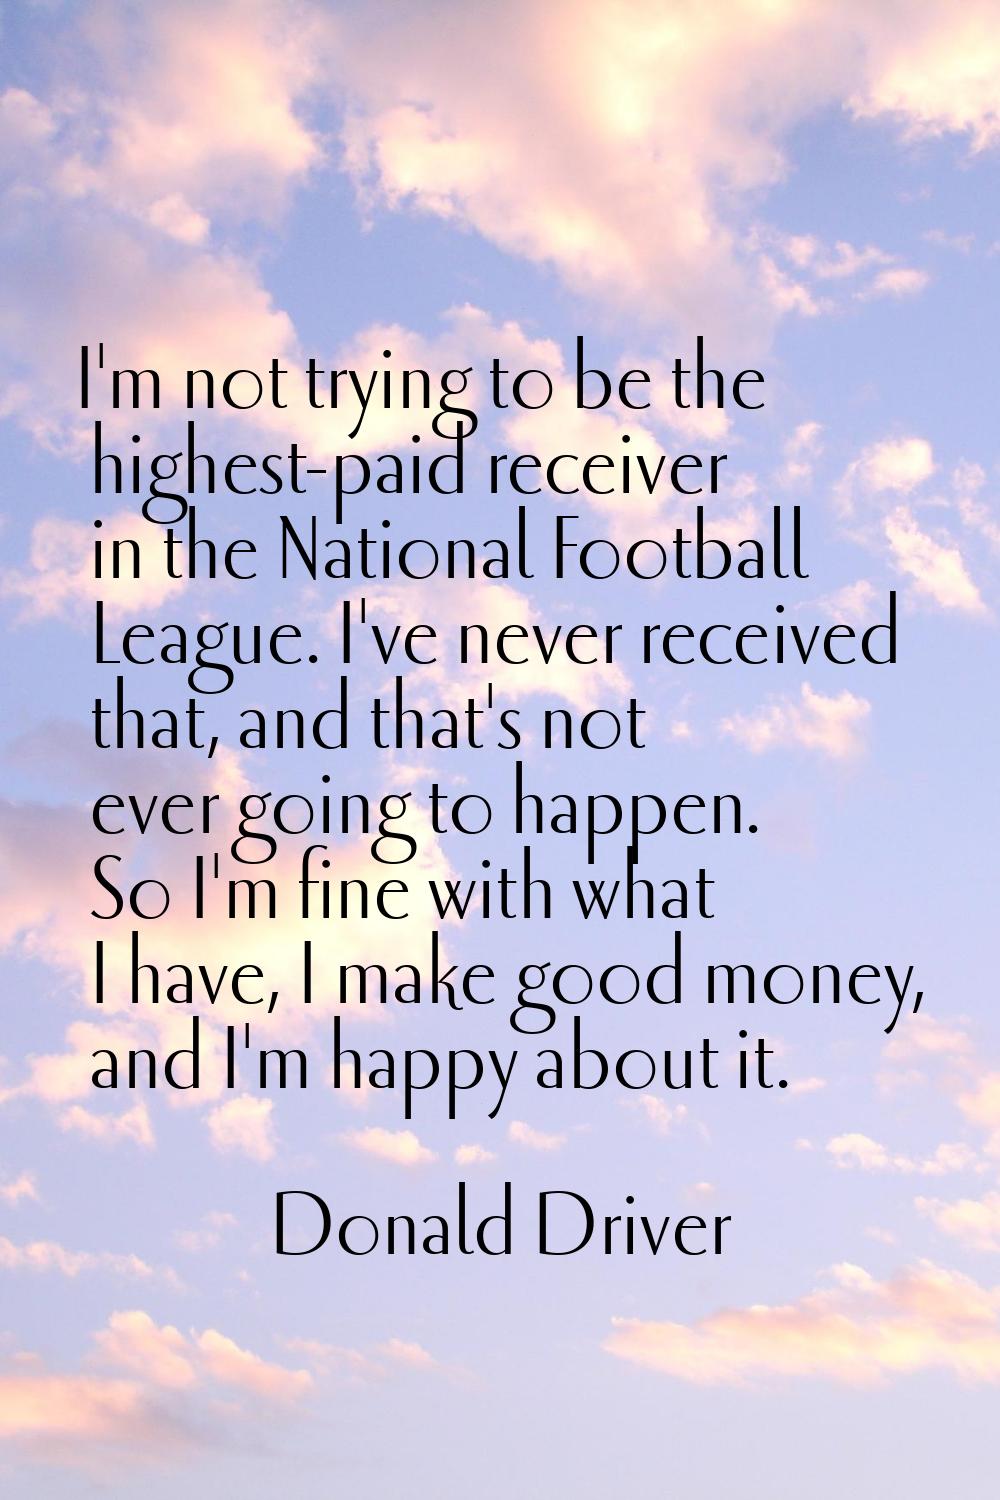 I'm not trying to be the highest-paid receiver in the National Football League. I've never received